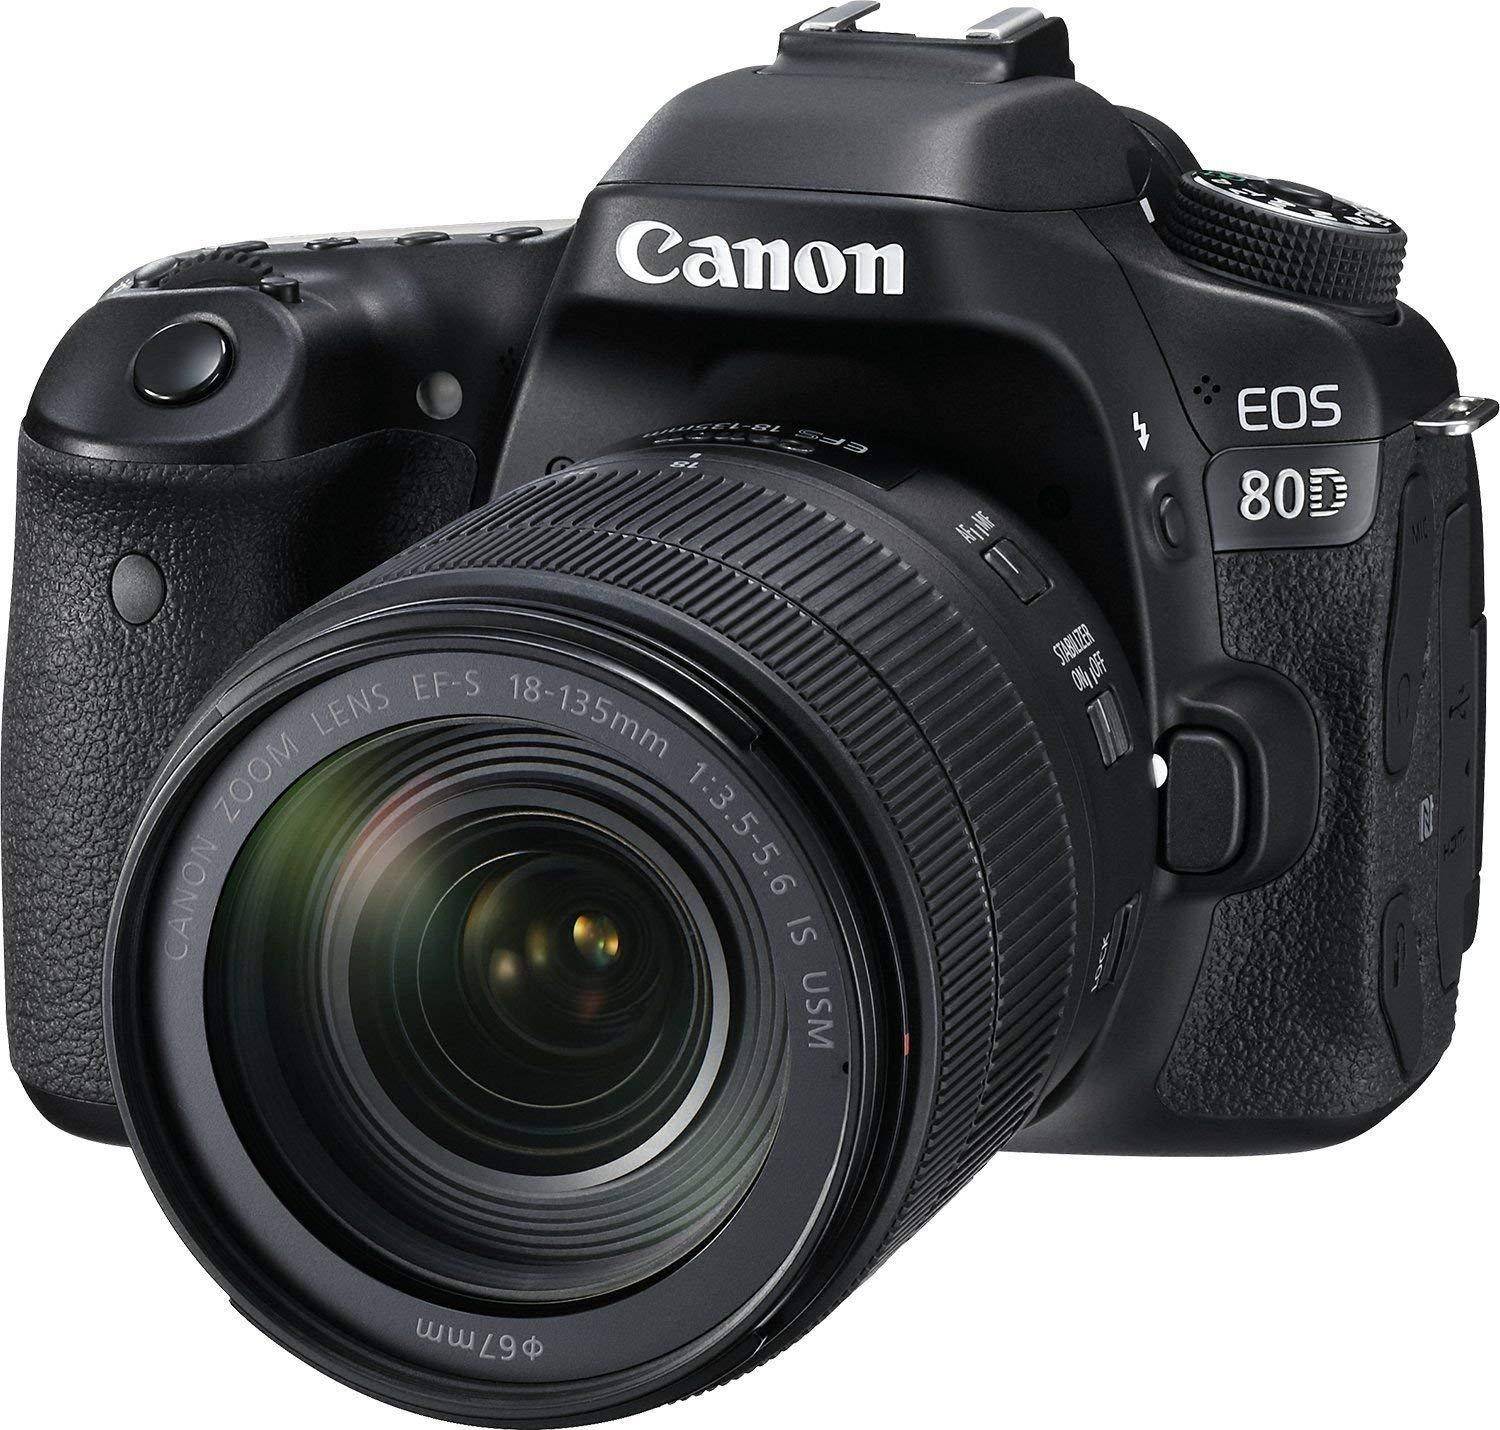 Canon EOS 80D DSLR Camera with EF-S 18-135mm USM Lens and Free 16GB Memory Card zoom image